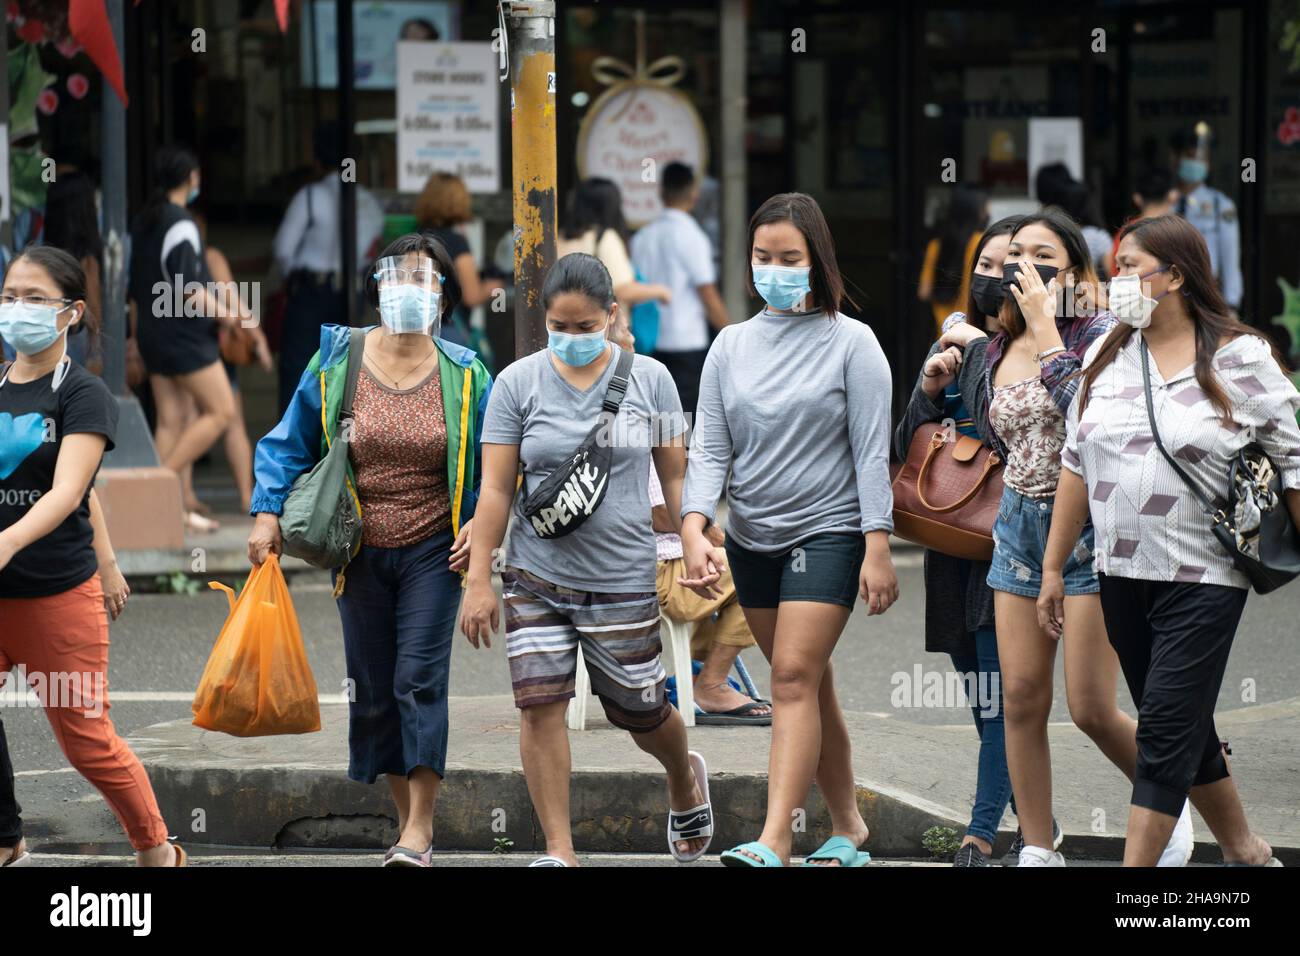 People in the Philippines crossing a road wearing face masks with one woman also wearing a face shield. Stock Photo